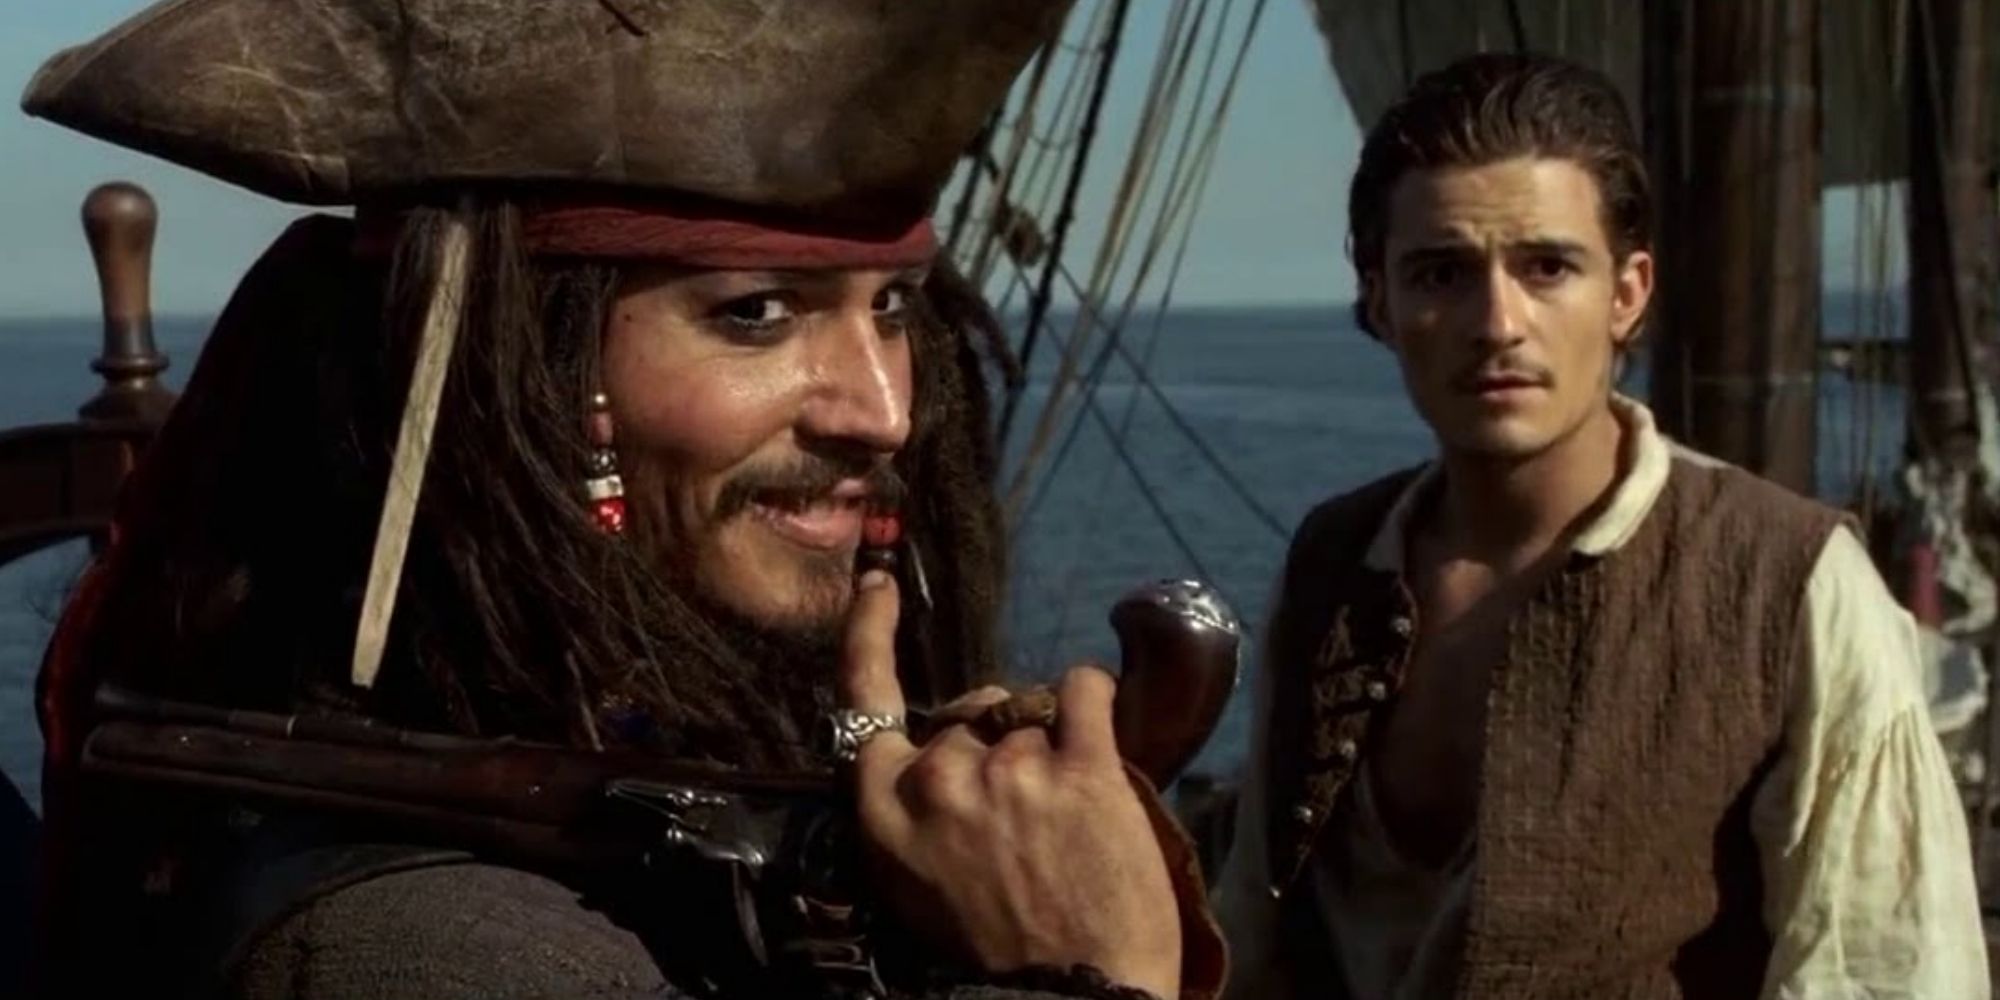 Jack Sparrow holding a pistol next to Will Turner from 'Pirates of the Caribbean: The Curse of the Black Pearl'